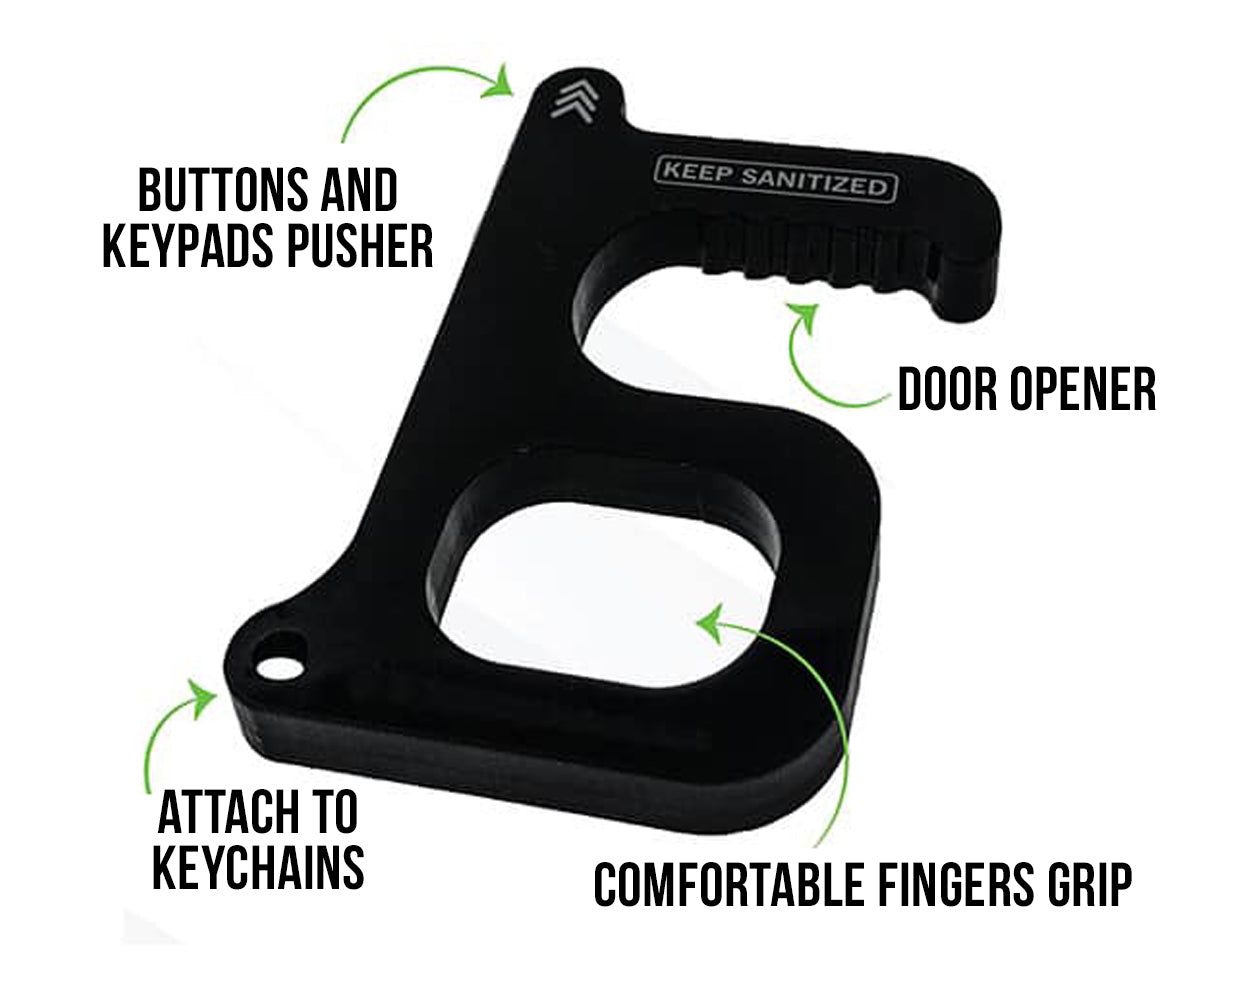 TK-001 Touch-less Key Chain Size 4 x 5” (Large) or  or 2.5 x 1.5” (Mini)- Touch Free Door Opener Contactless No Touch Tool Key Chain Antimicrobial Hygienic Door Pull No Virus No Germs Risk Prevention